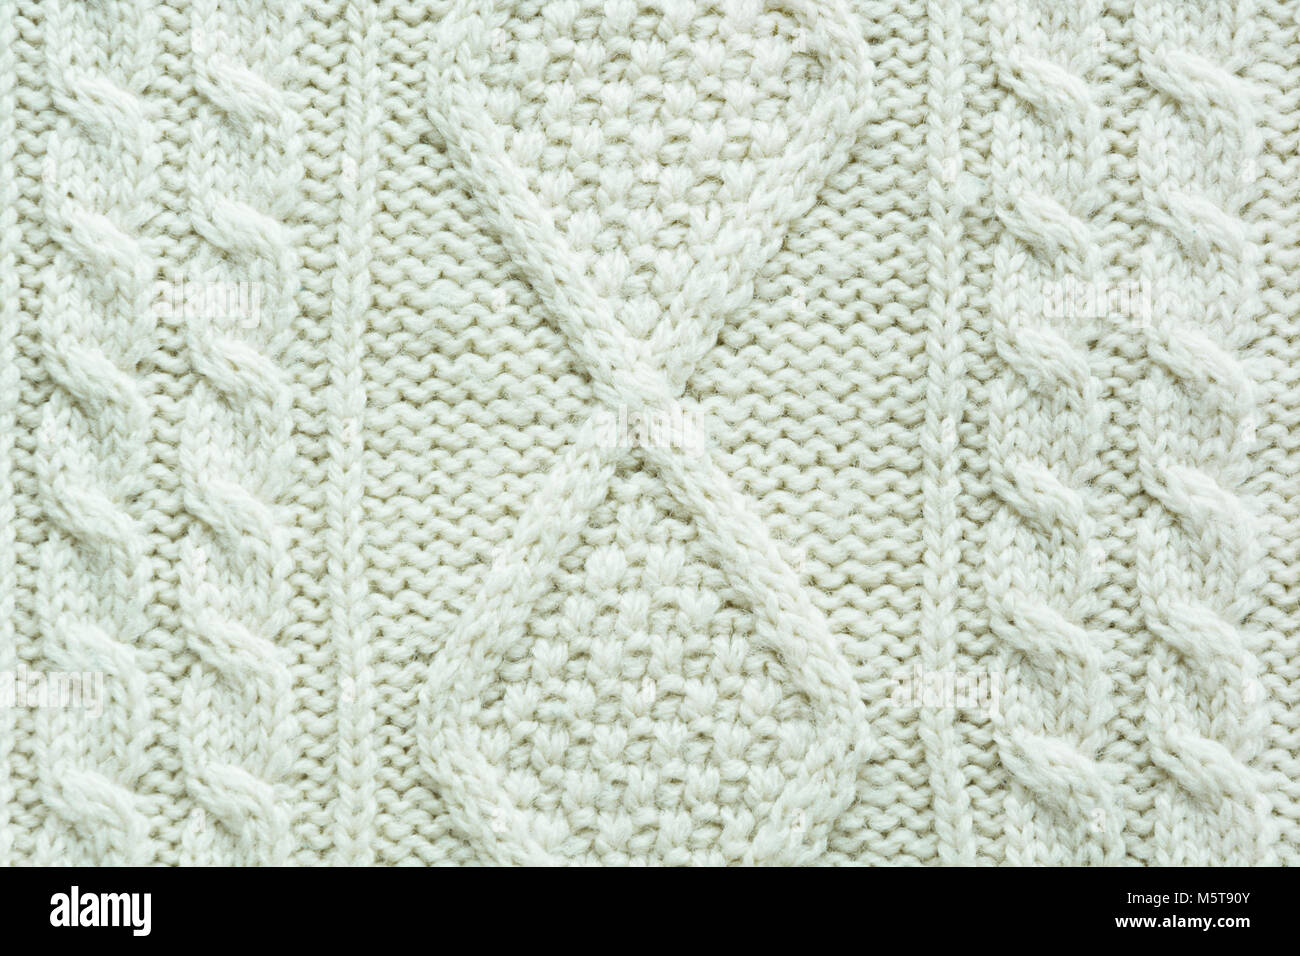 Texture Of Knitted Handmade Christmas White Sweater Close